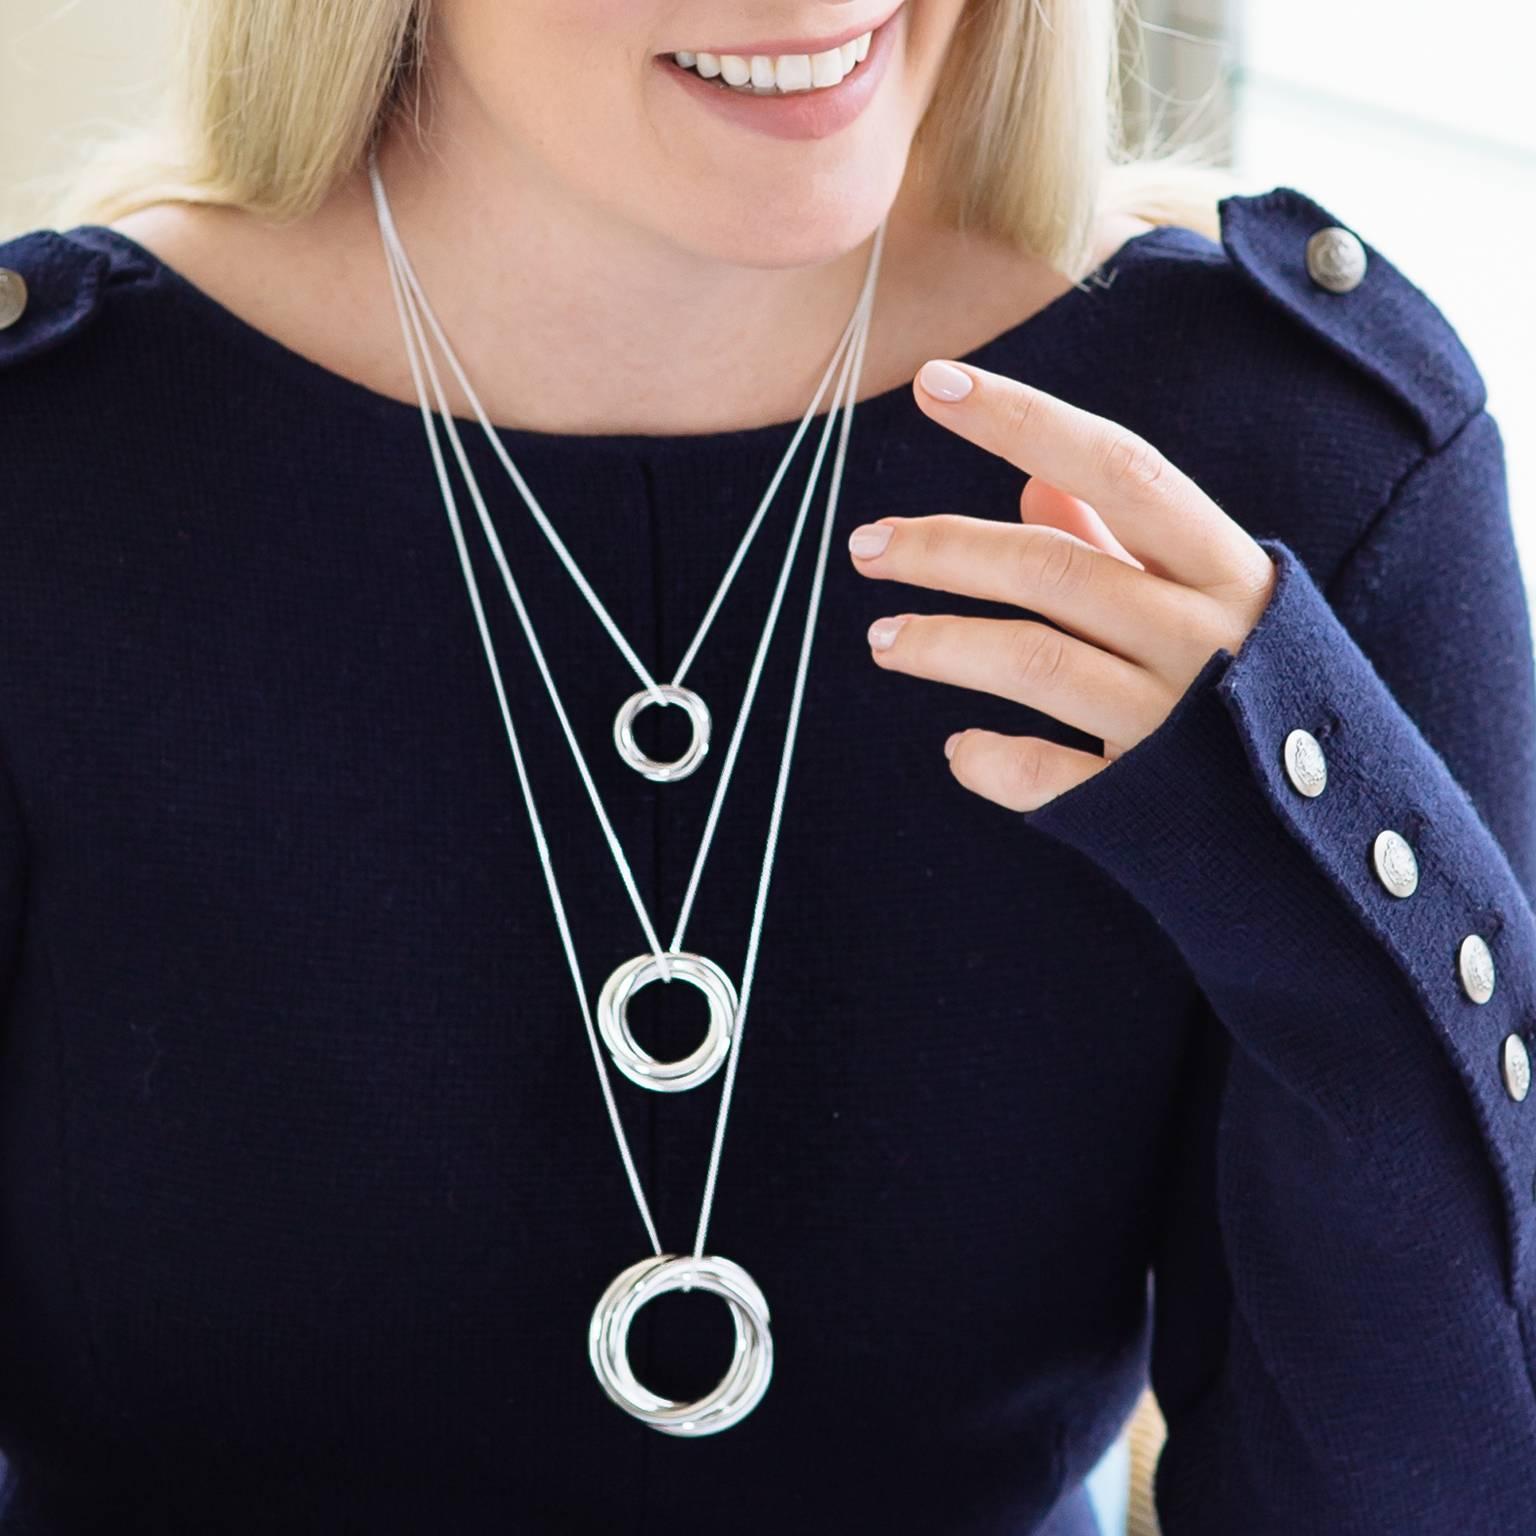 This russian ring necklace, titled the 'Alexandra' is one of our bestsellers, and is worn by celebrities and royalty alike. This trinity of interconnected rings represents family, unity and a bond that cannot be broken. Unique, and unique to you